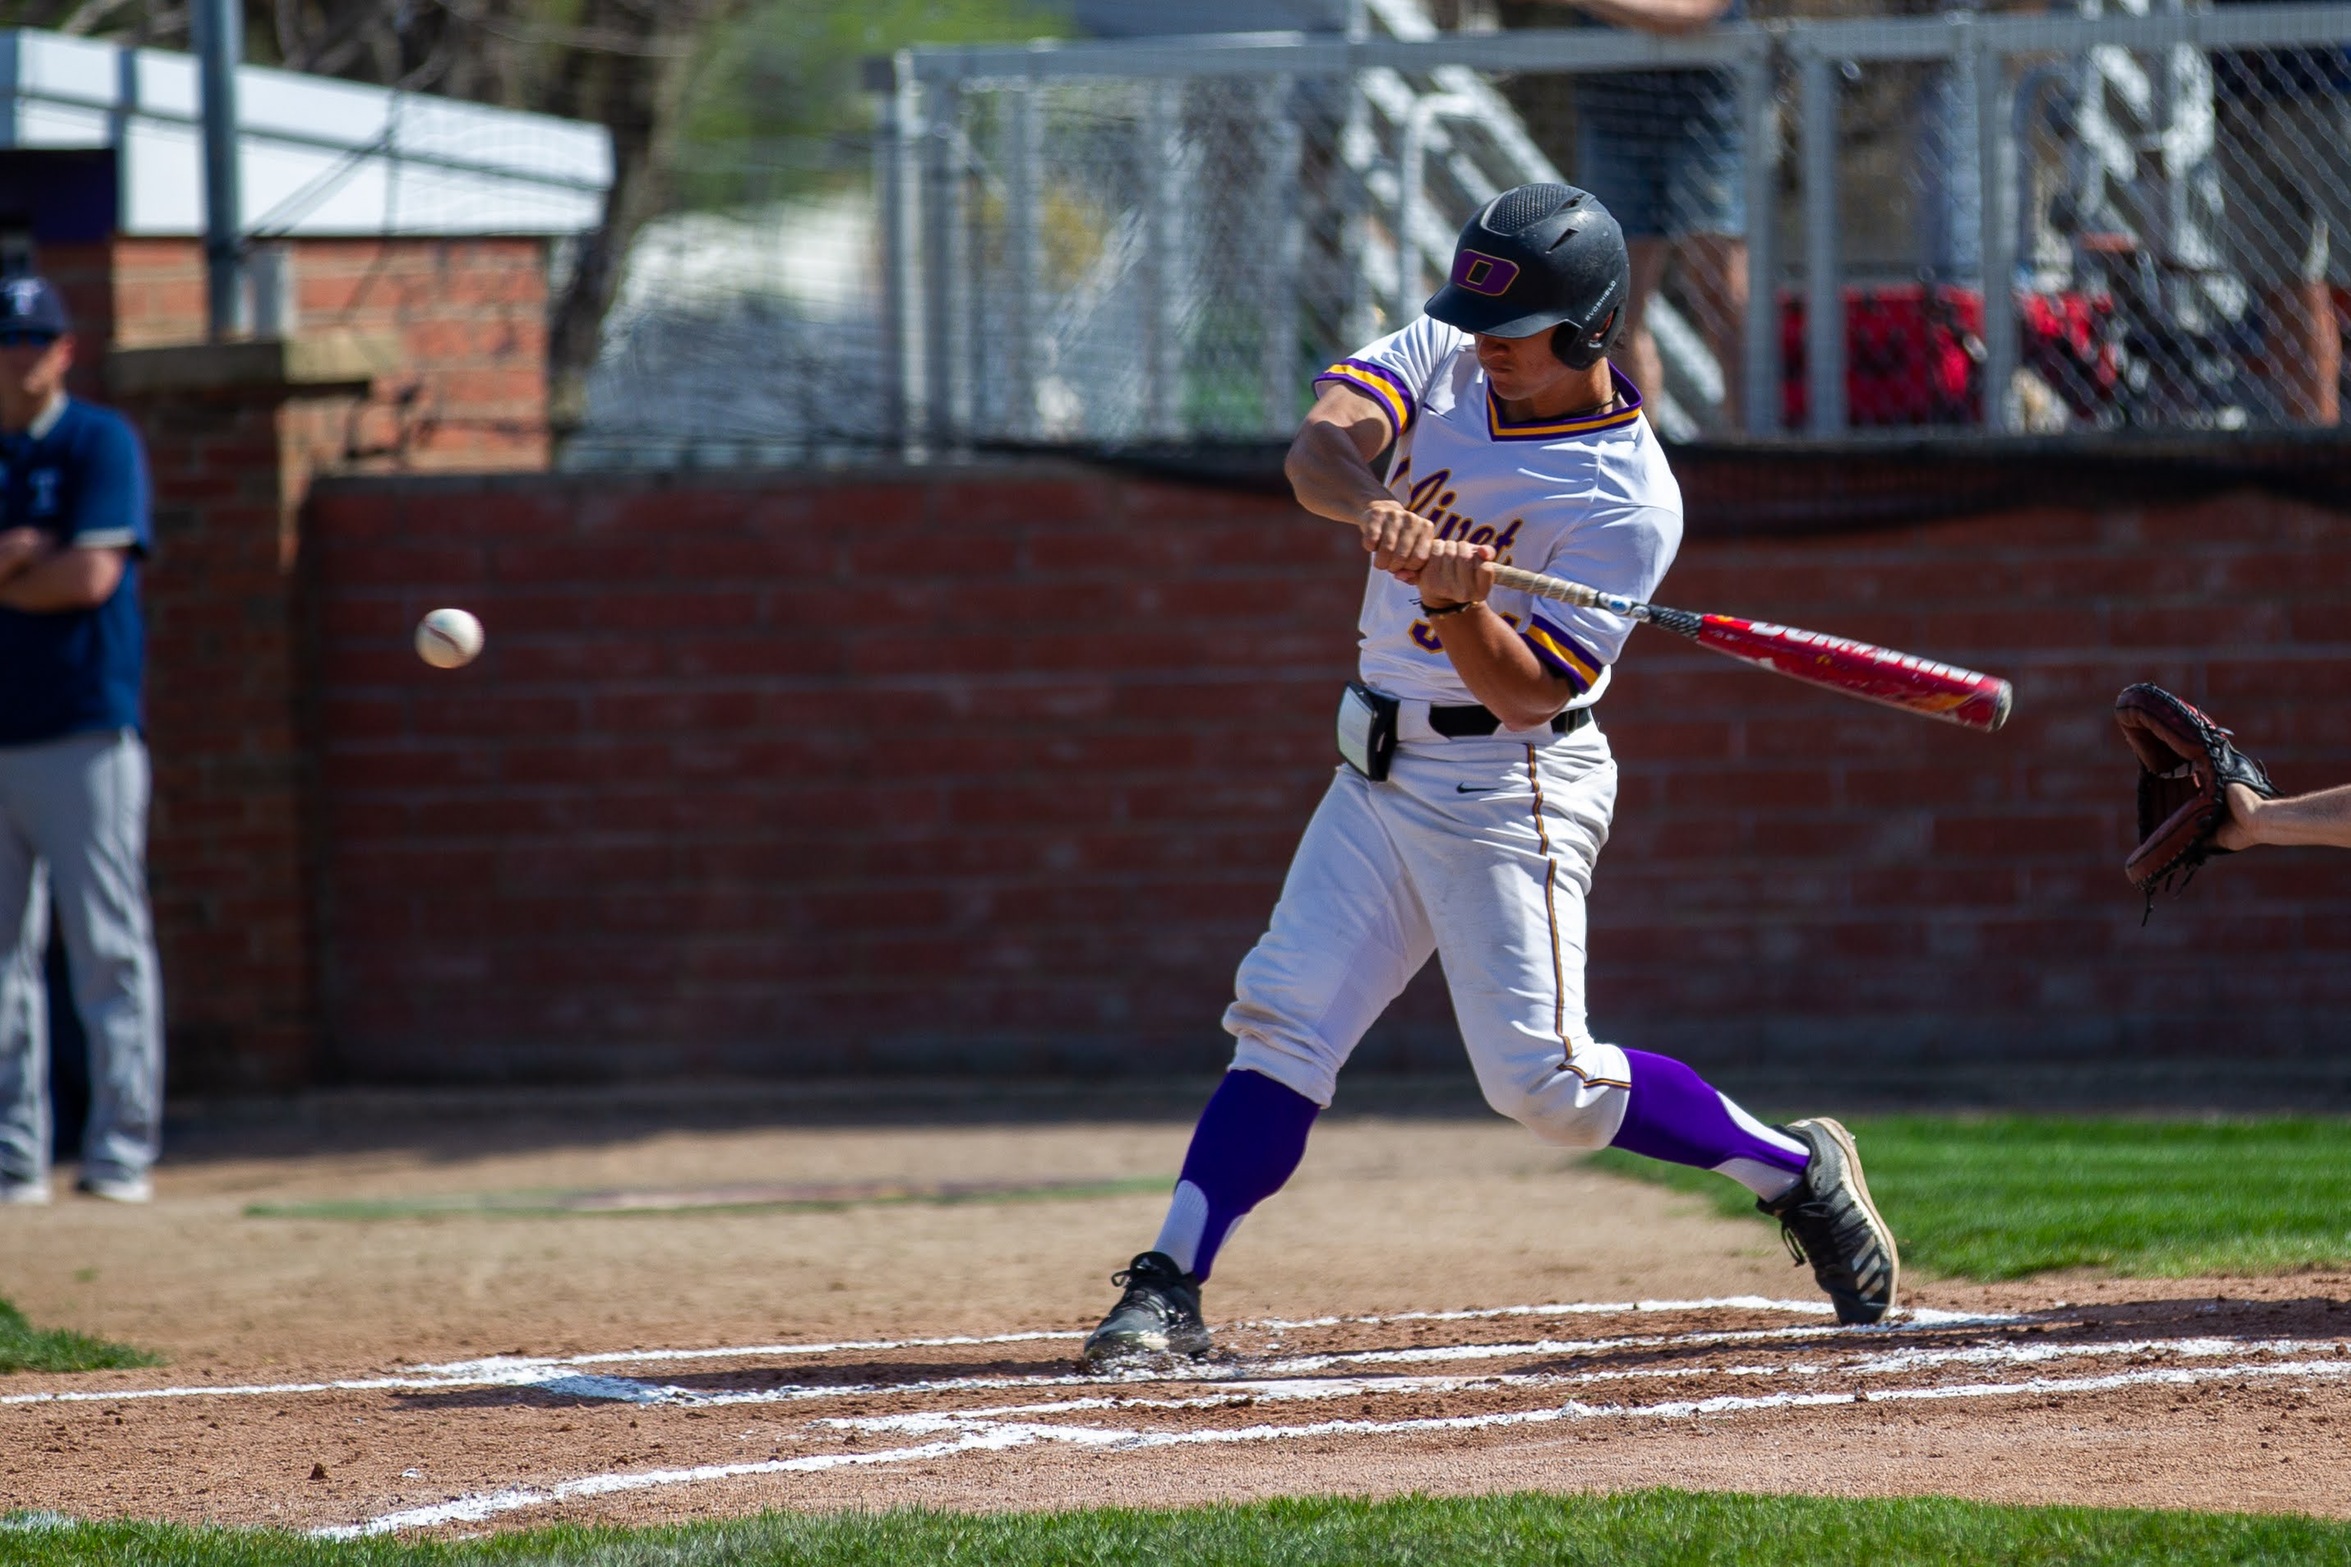 ONU GETS BACK IN WIN COLUMN; TAKE TWO-OUT-OF-FOUR IN MISSOURI 